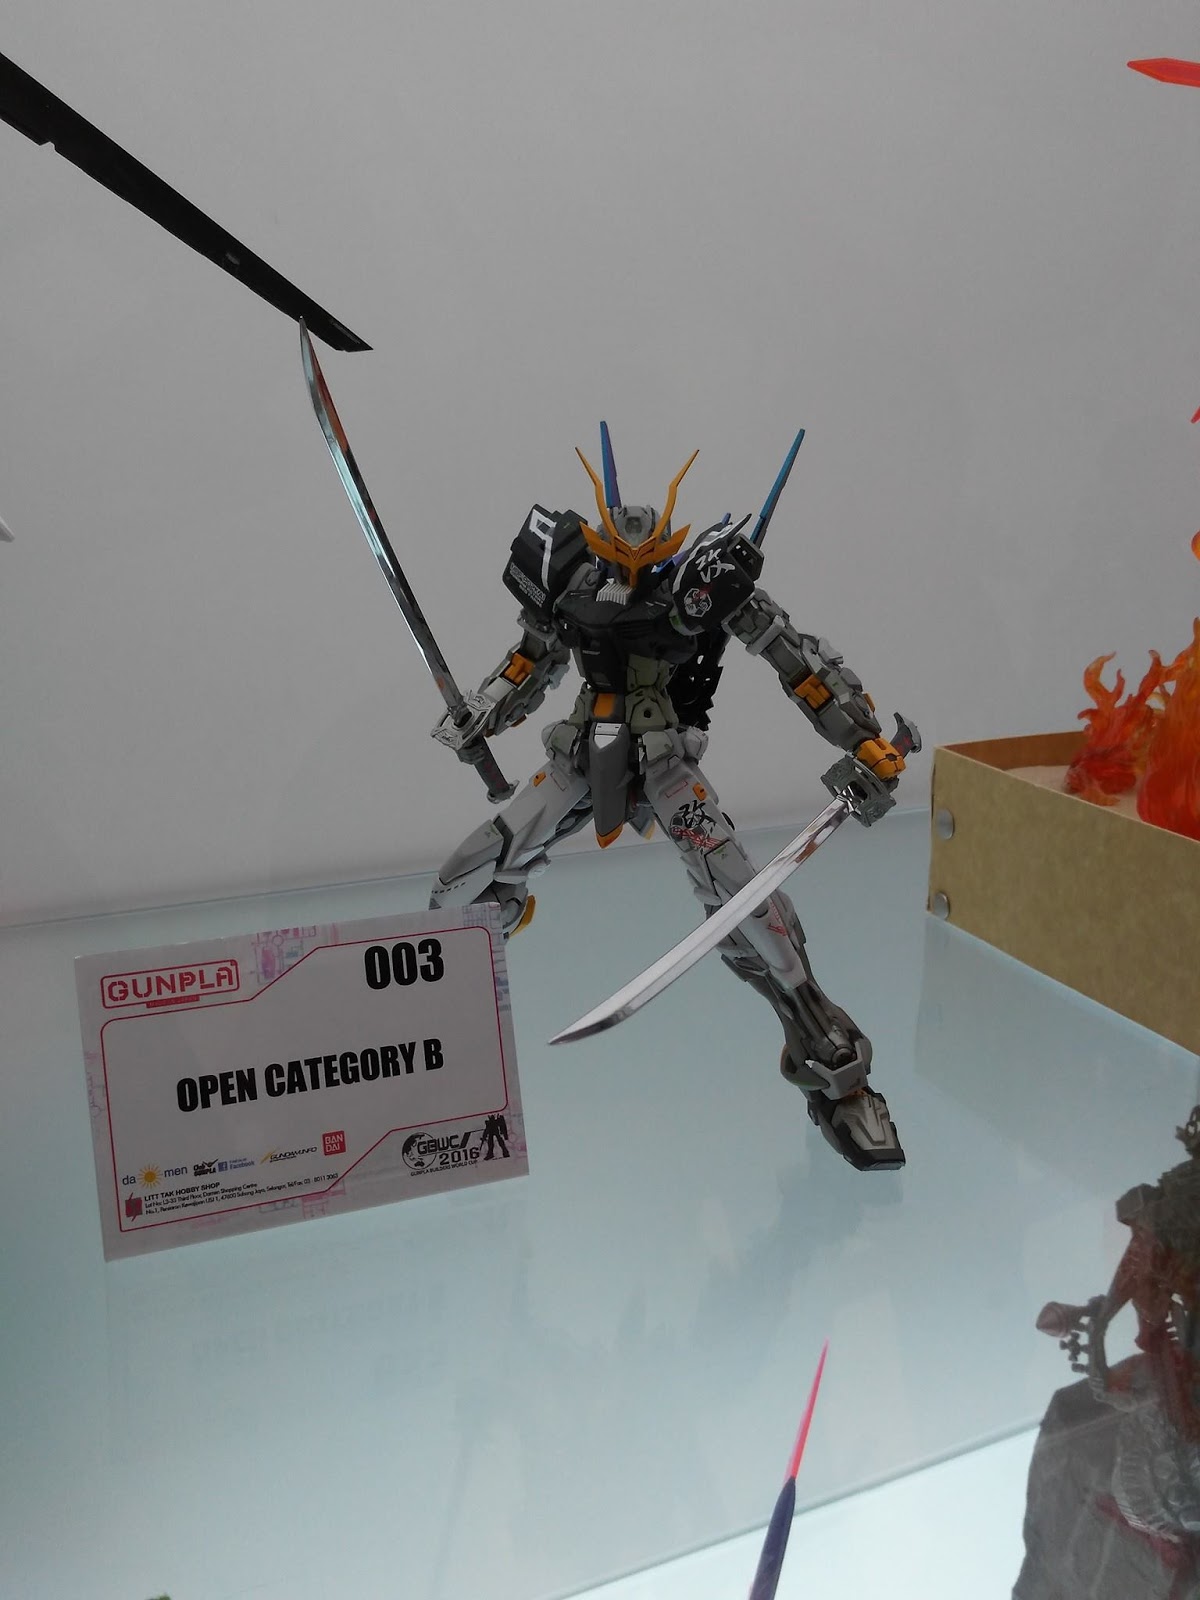 GunPla Builders World Cup [GBWC] 2016 Malaysia Image Gallery by Colony